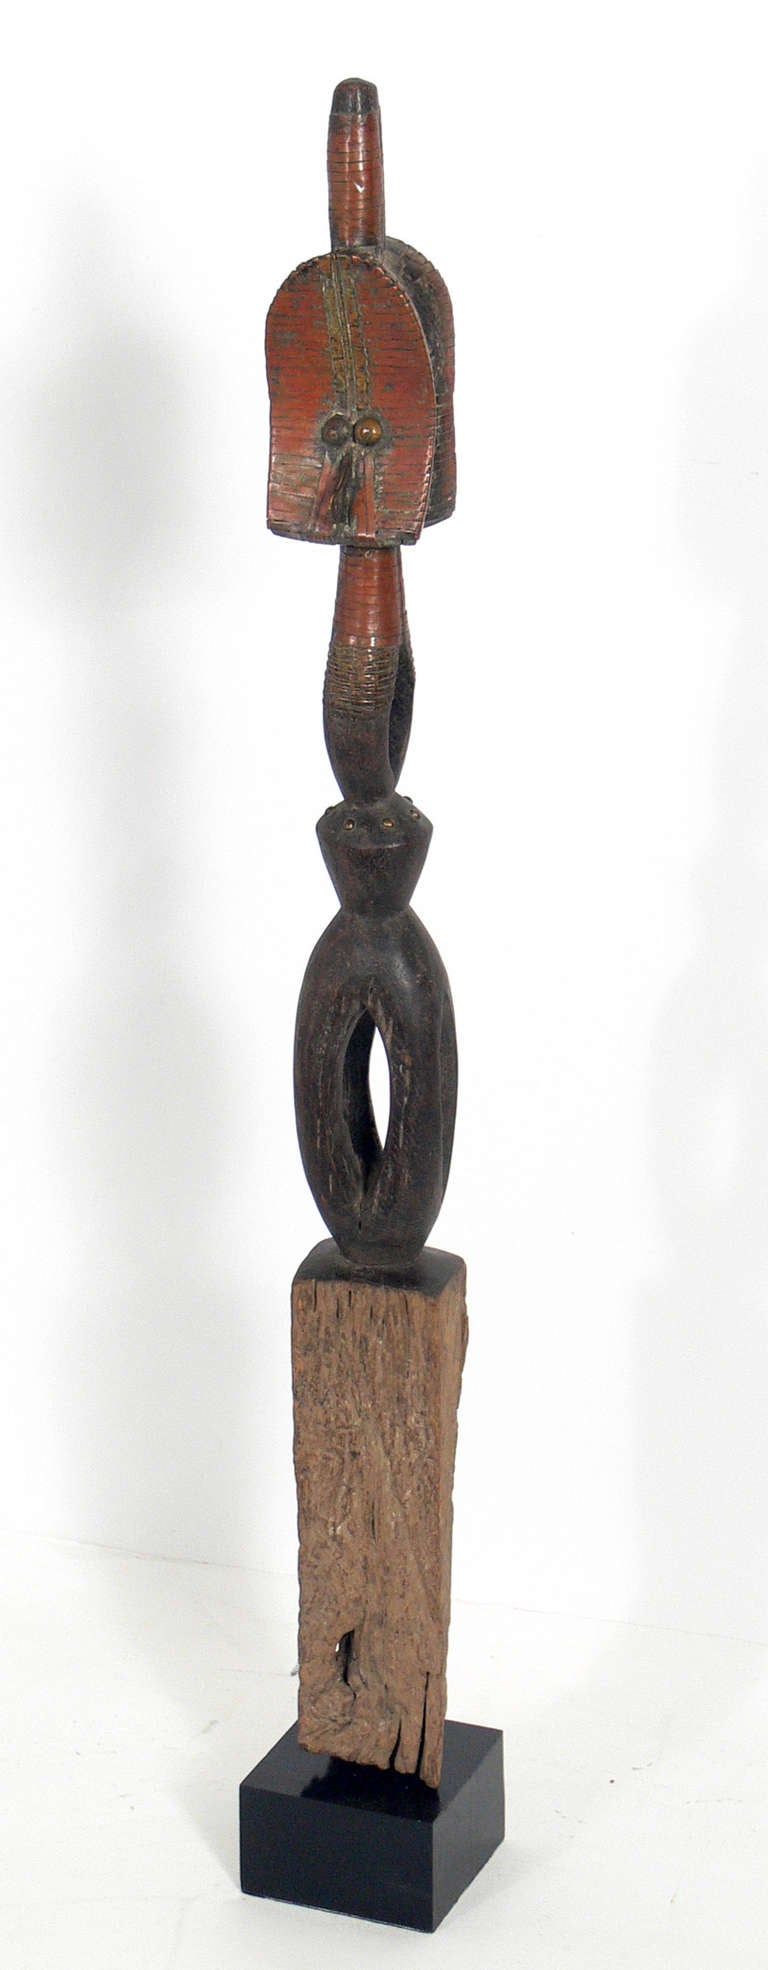 African Reliquary Sculpture with Modernist Design, most likely executed by the African DRC Kota Mahongwe people, 20th century. Mounted on a new black lacquer base.  Many modernist artists, including Picasso and Modigliani, collected African art and